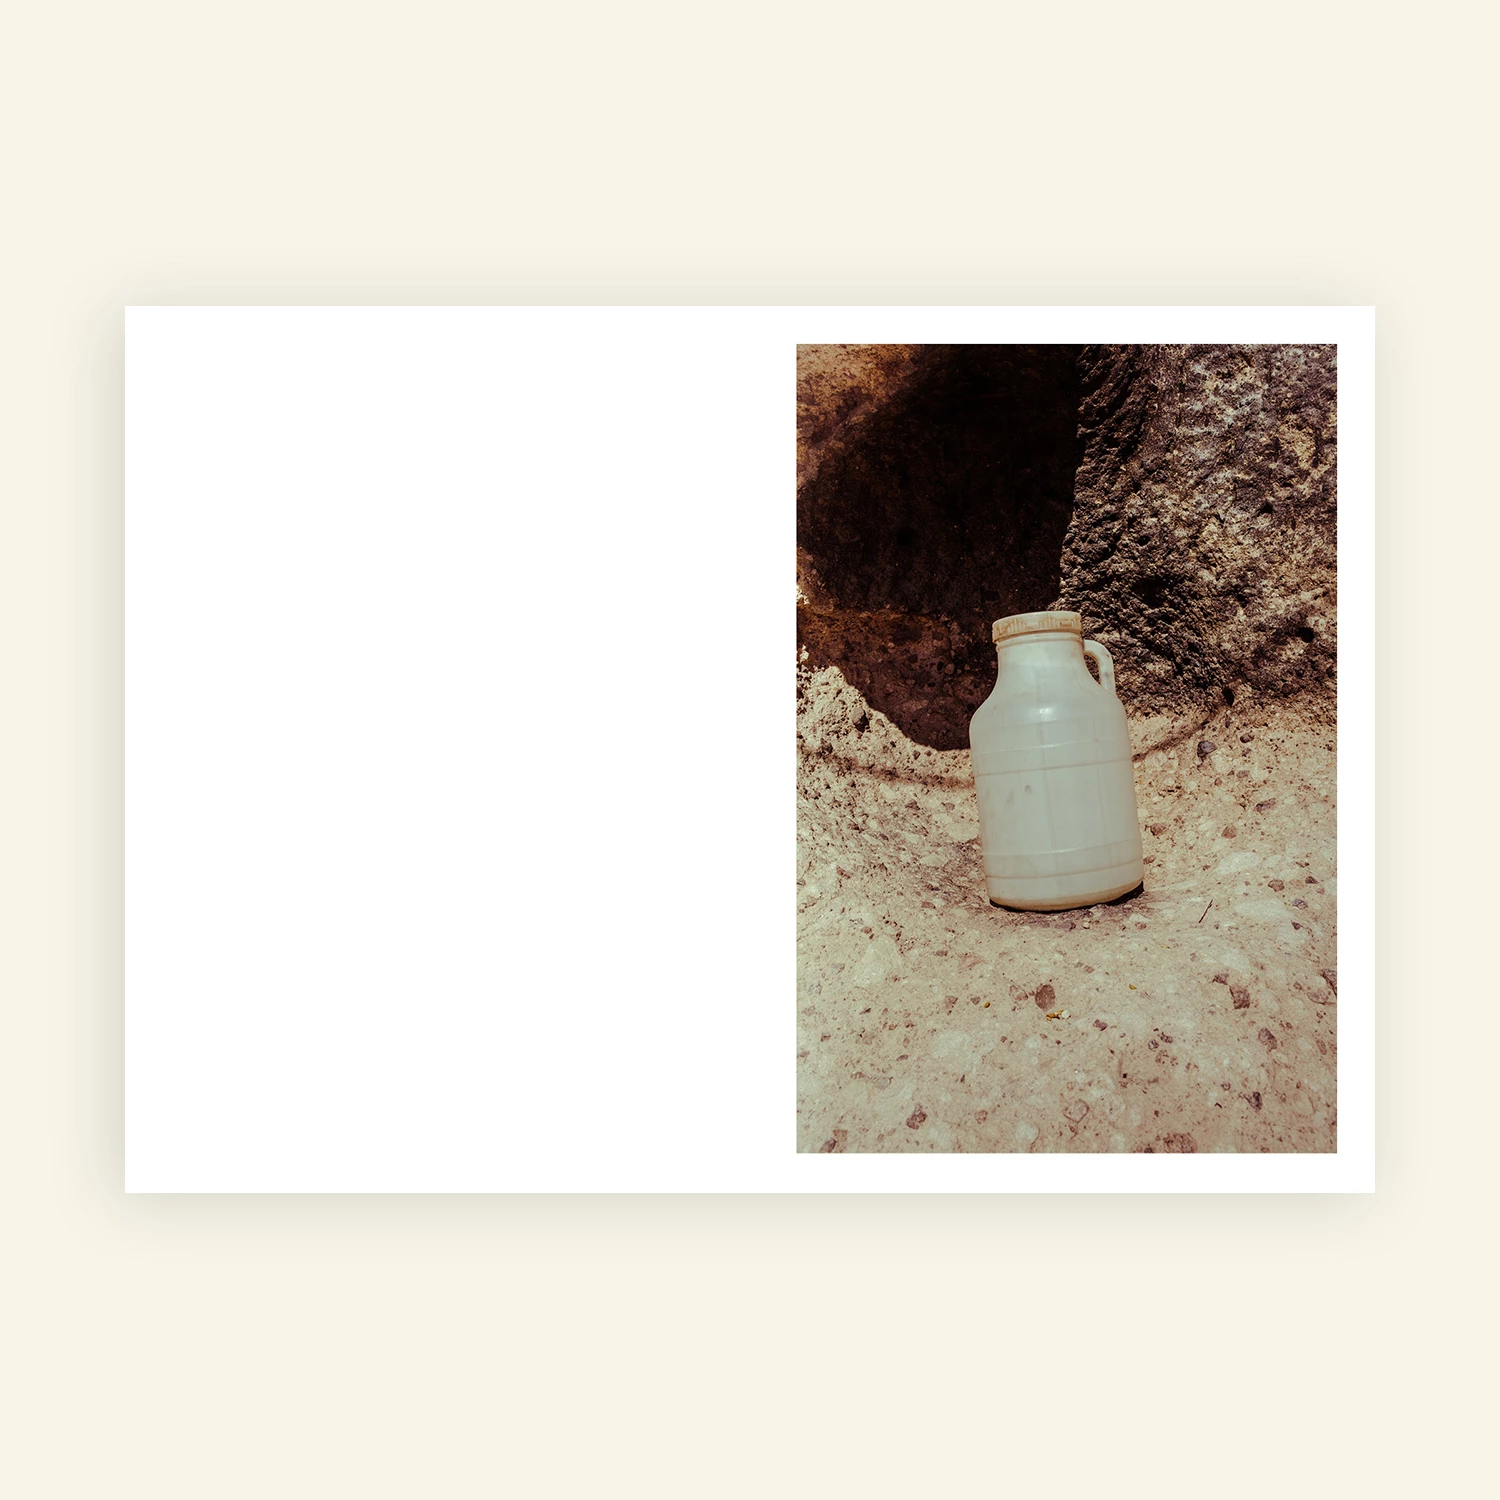 Cover of the photo zine 'A lizard walked beside me in the desert' with picture taken in Iran